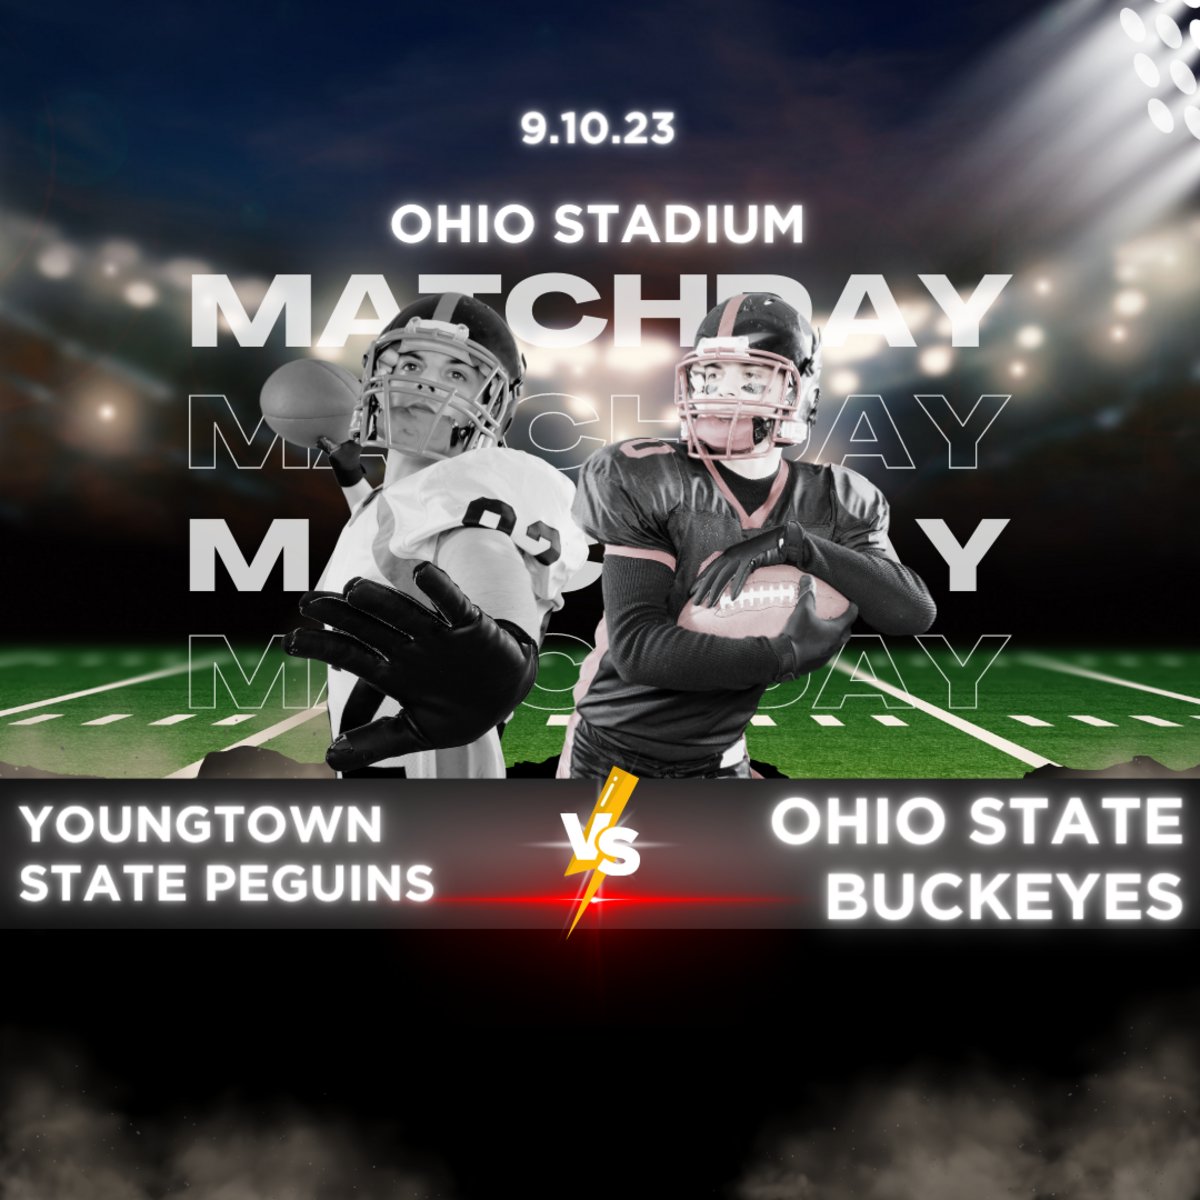 Don't miss out on the start of #collegefootball season! Head to the #OhioStadium this Saturday to watch the #OhioStateBuckeyes face off against the #YoungstownStatePenguins. Keep up with the season by going to bit.ly/44kWIvA.